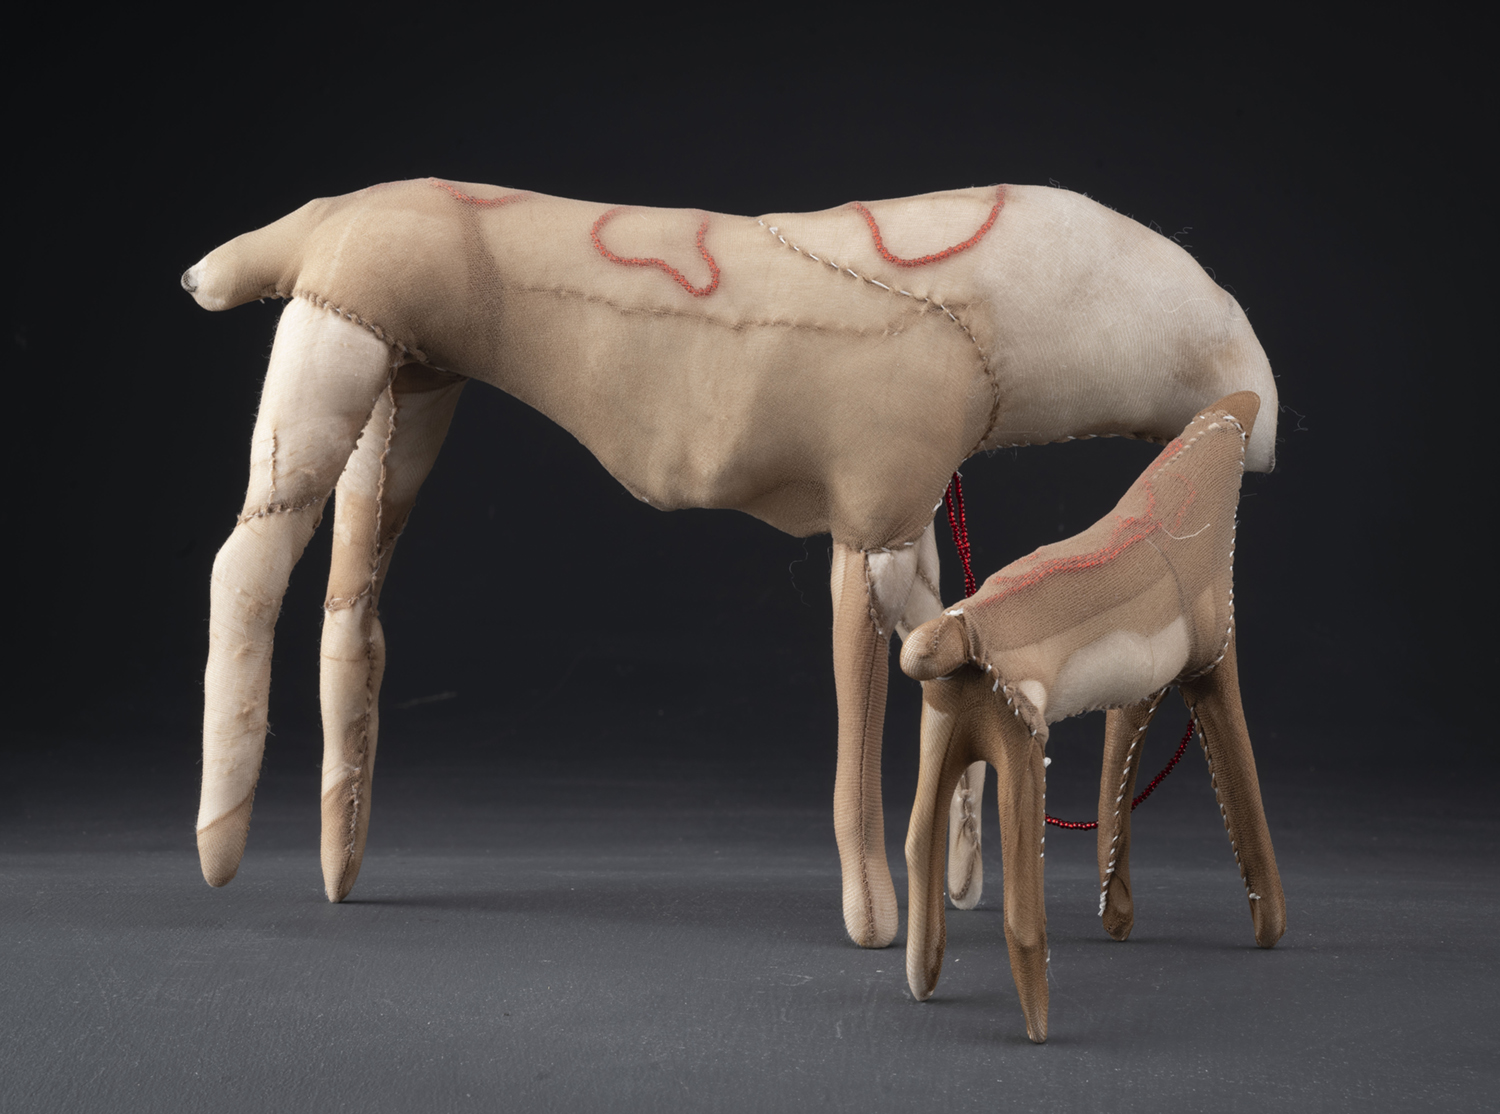 Sculptures of a mother moose and her calf, courtesy of the artist